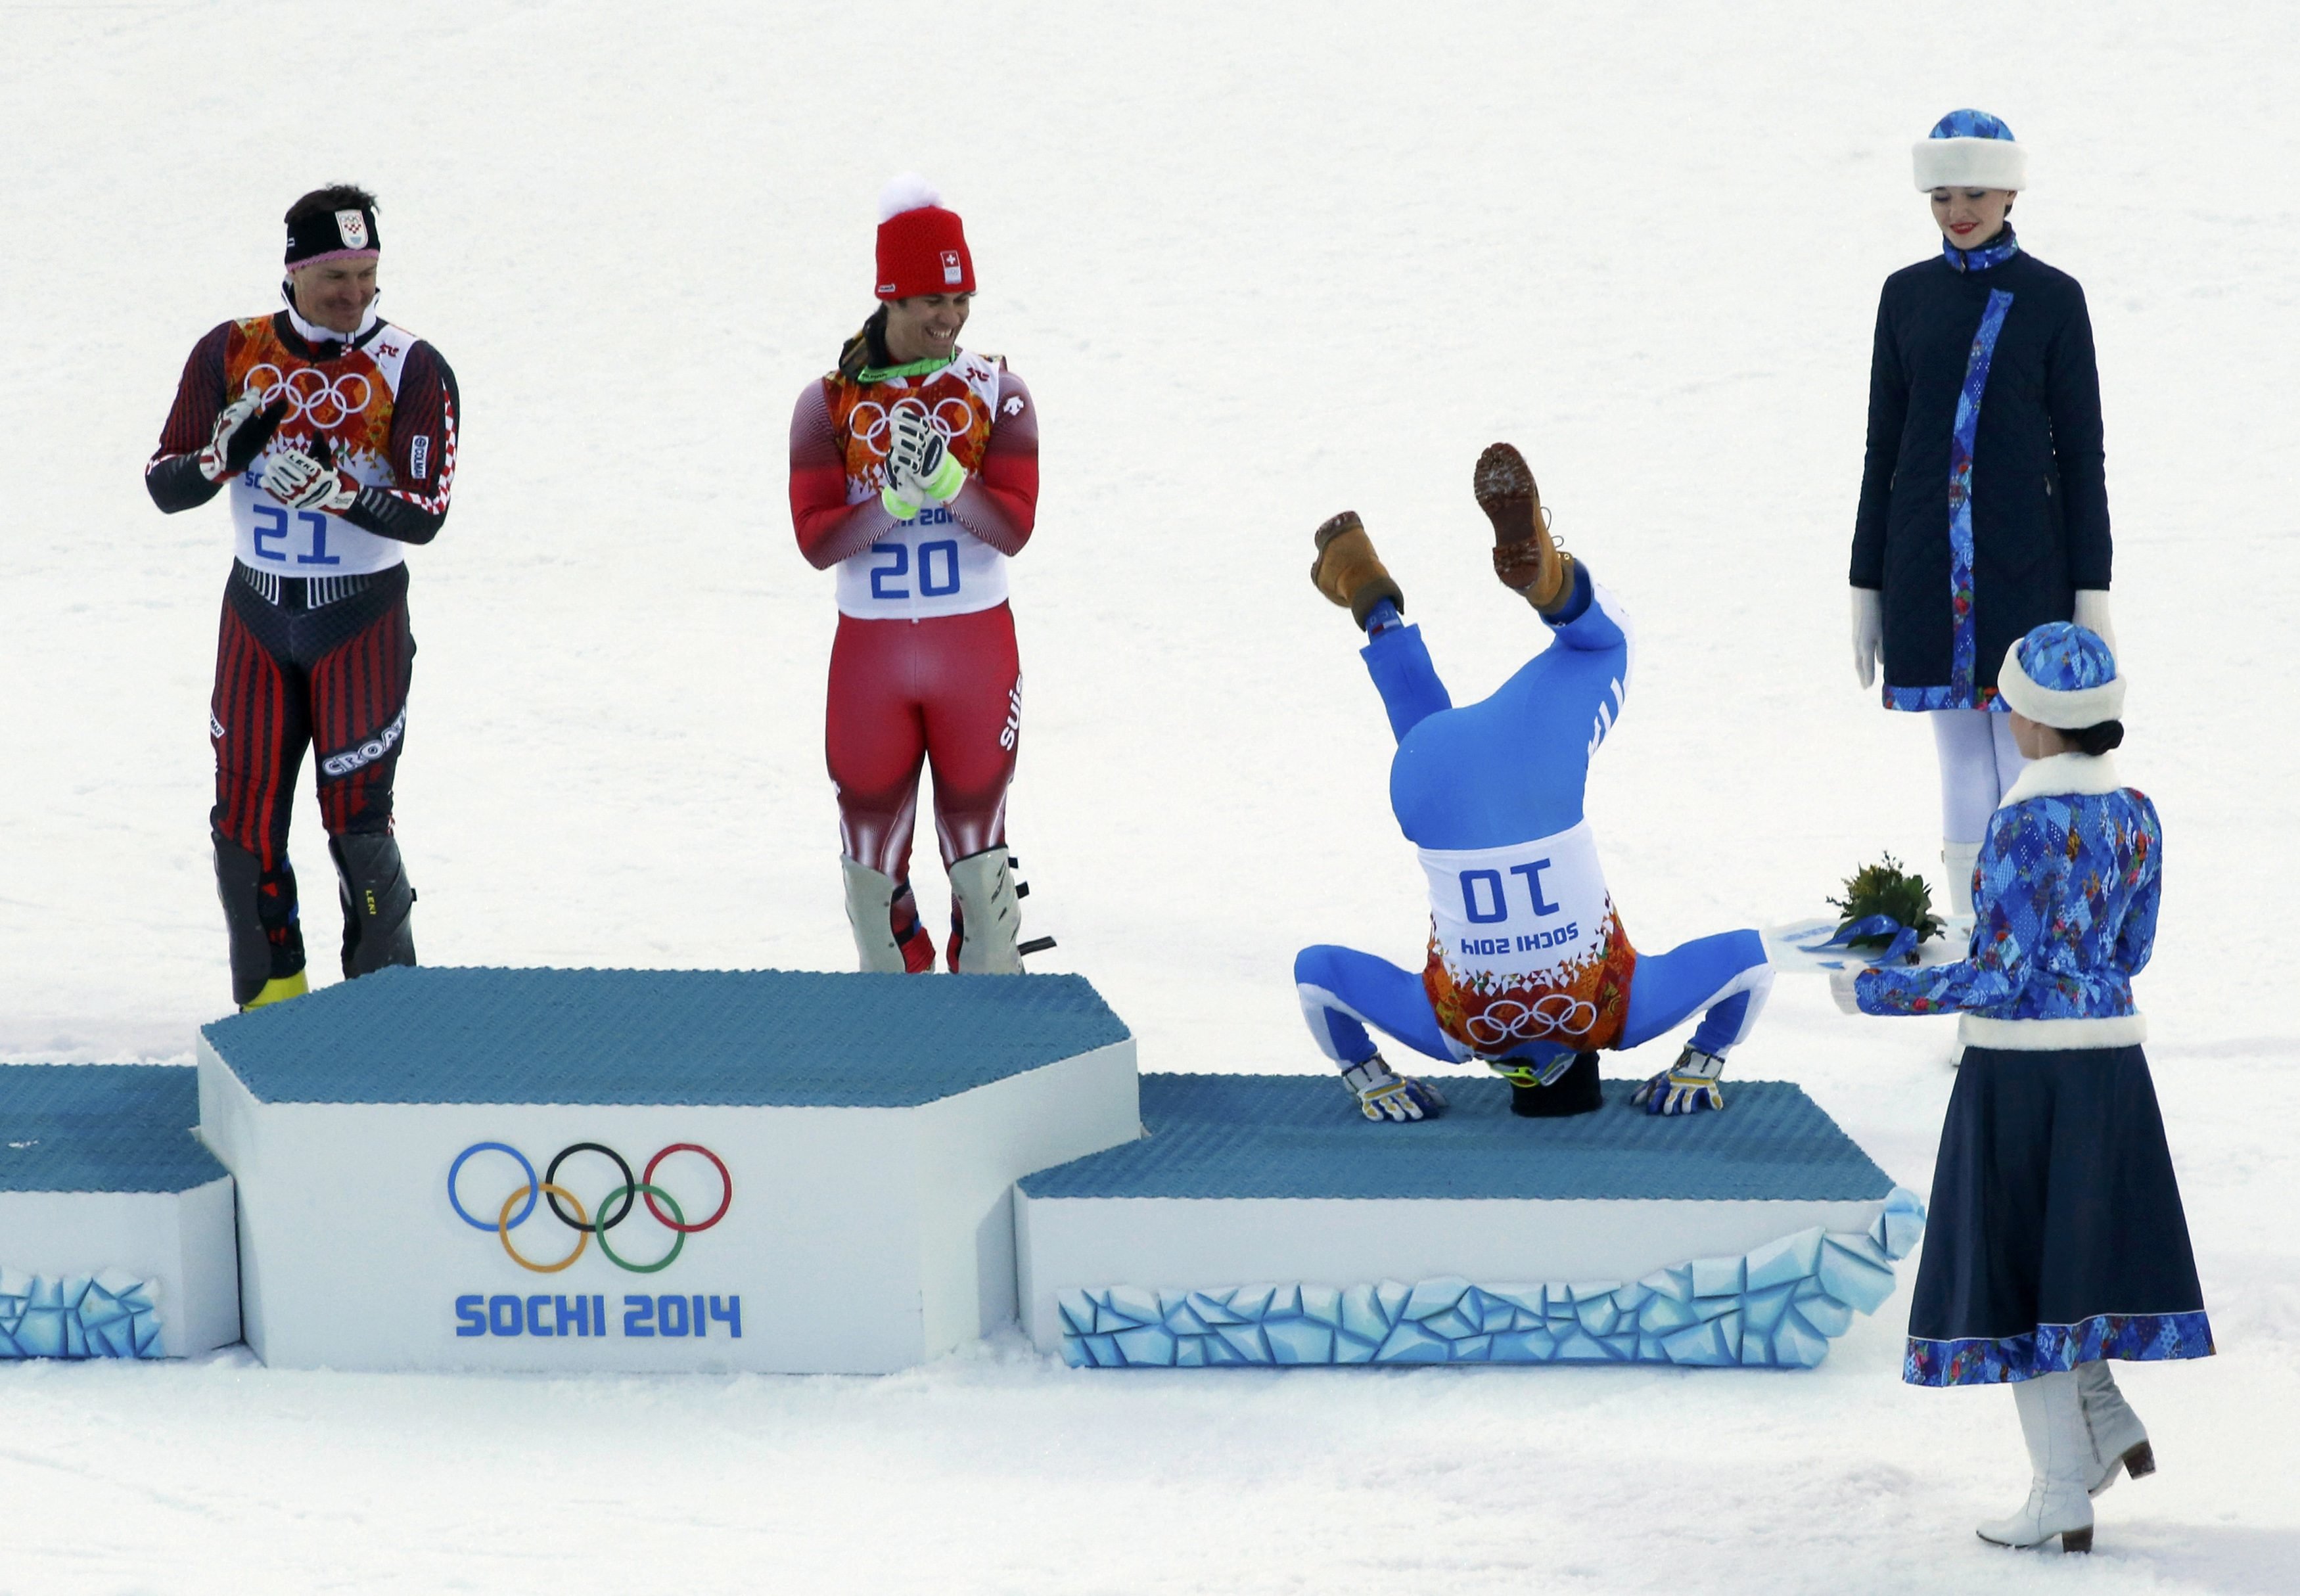 Third-placed Italy's Christof Innerhofer (2nd R) does a somersault on the podium as winner Switzerland's Sandro Viletta (2nd L) and second-placed Croatia's Ivica Kostelic (L) laugh after the men's alpine skiing super combined event.